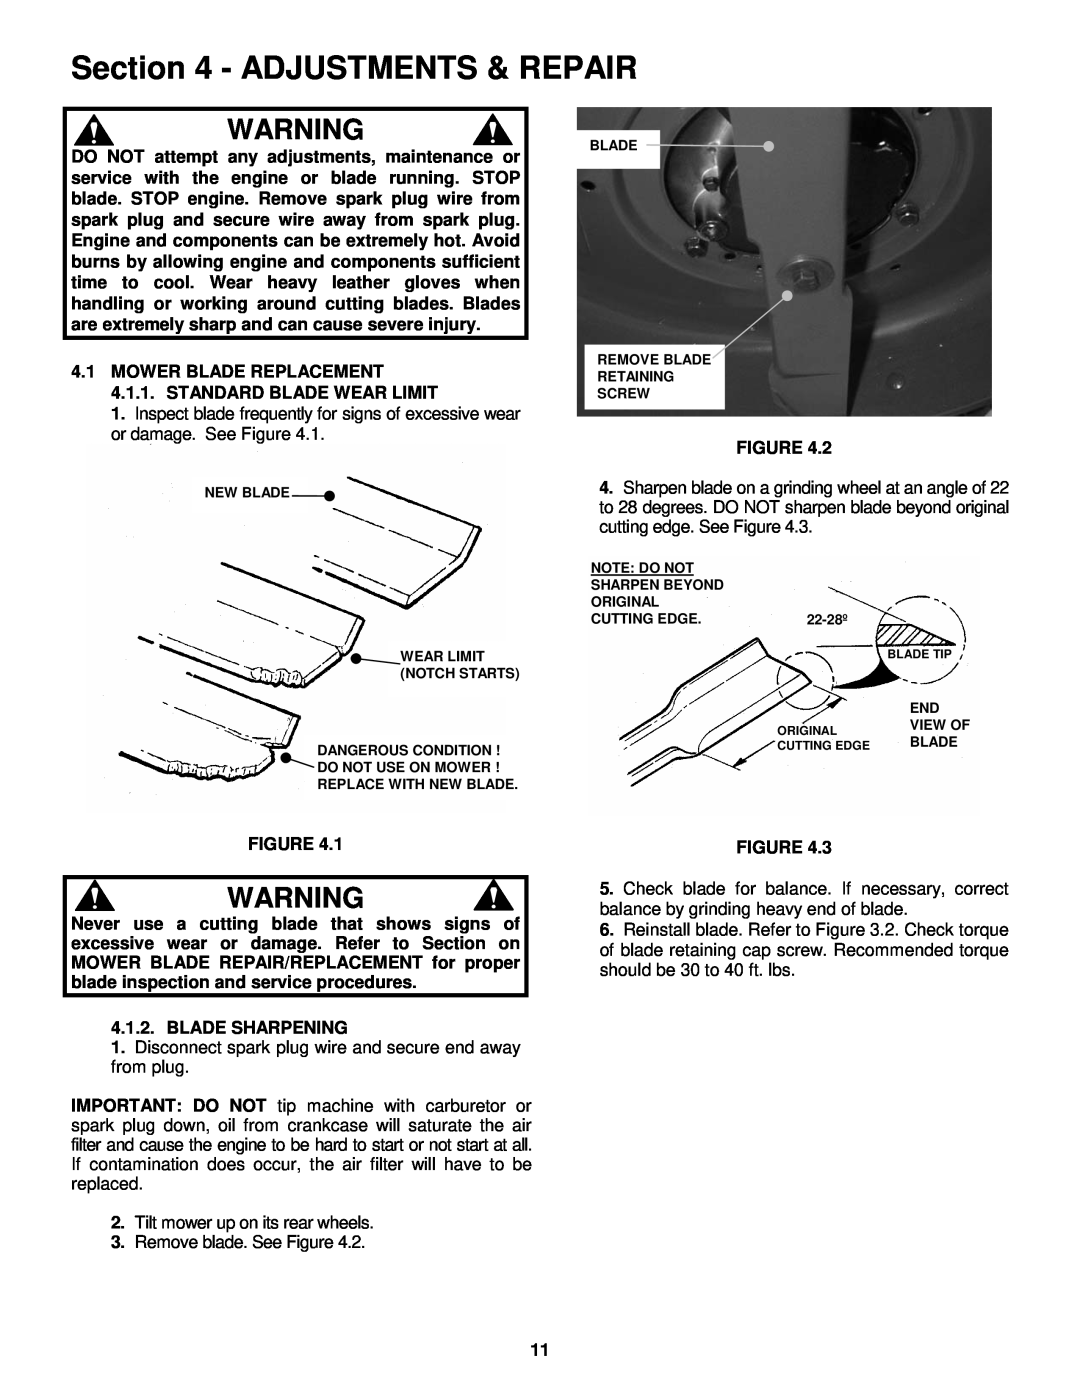 Snapper R194014 important safety instructions Adjustments & Repair, Blade Tip, Original, Cutting Edge 